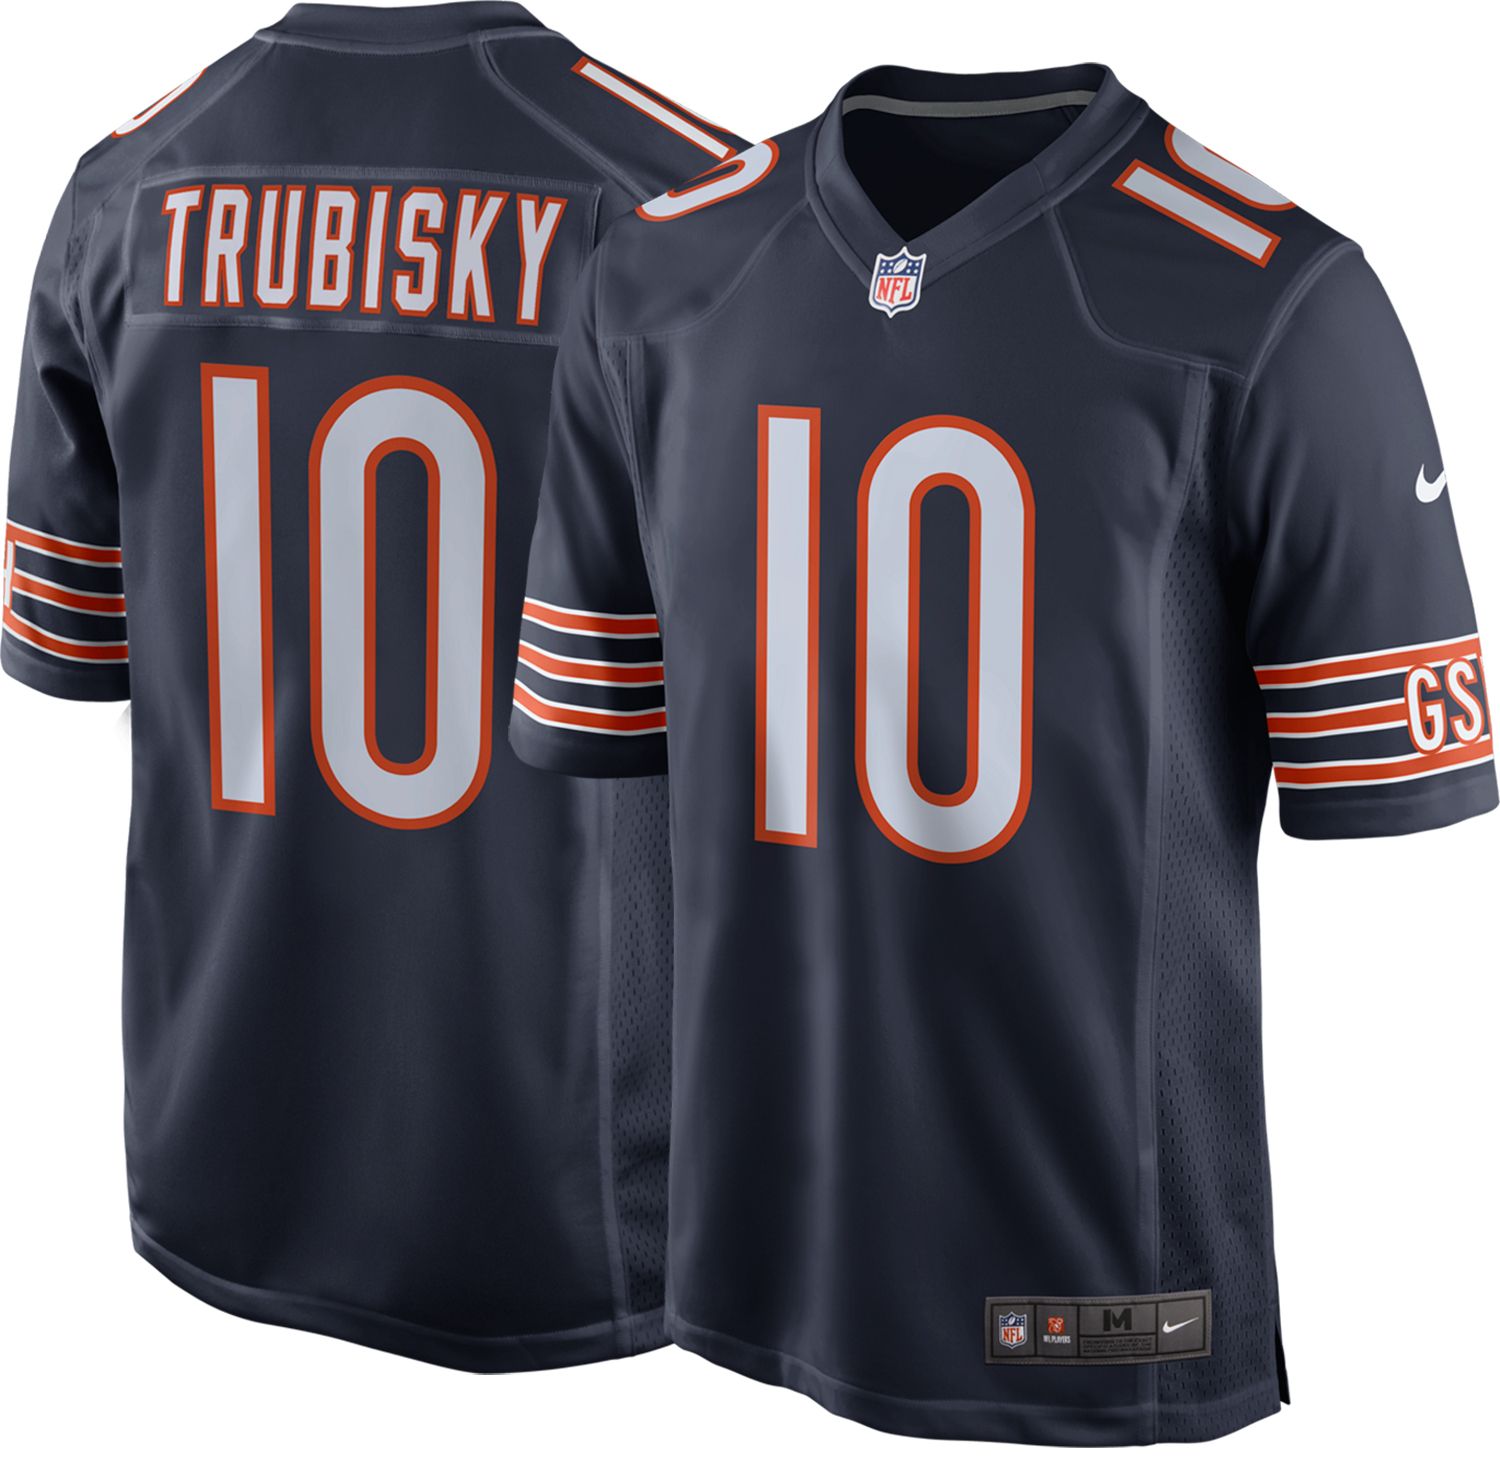 mitchell trubisky authentic jersey